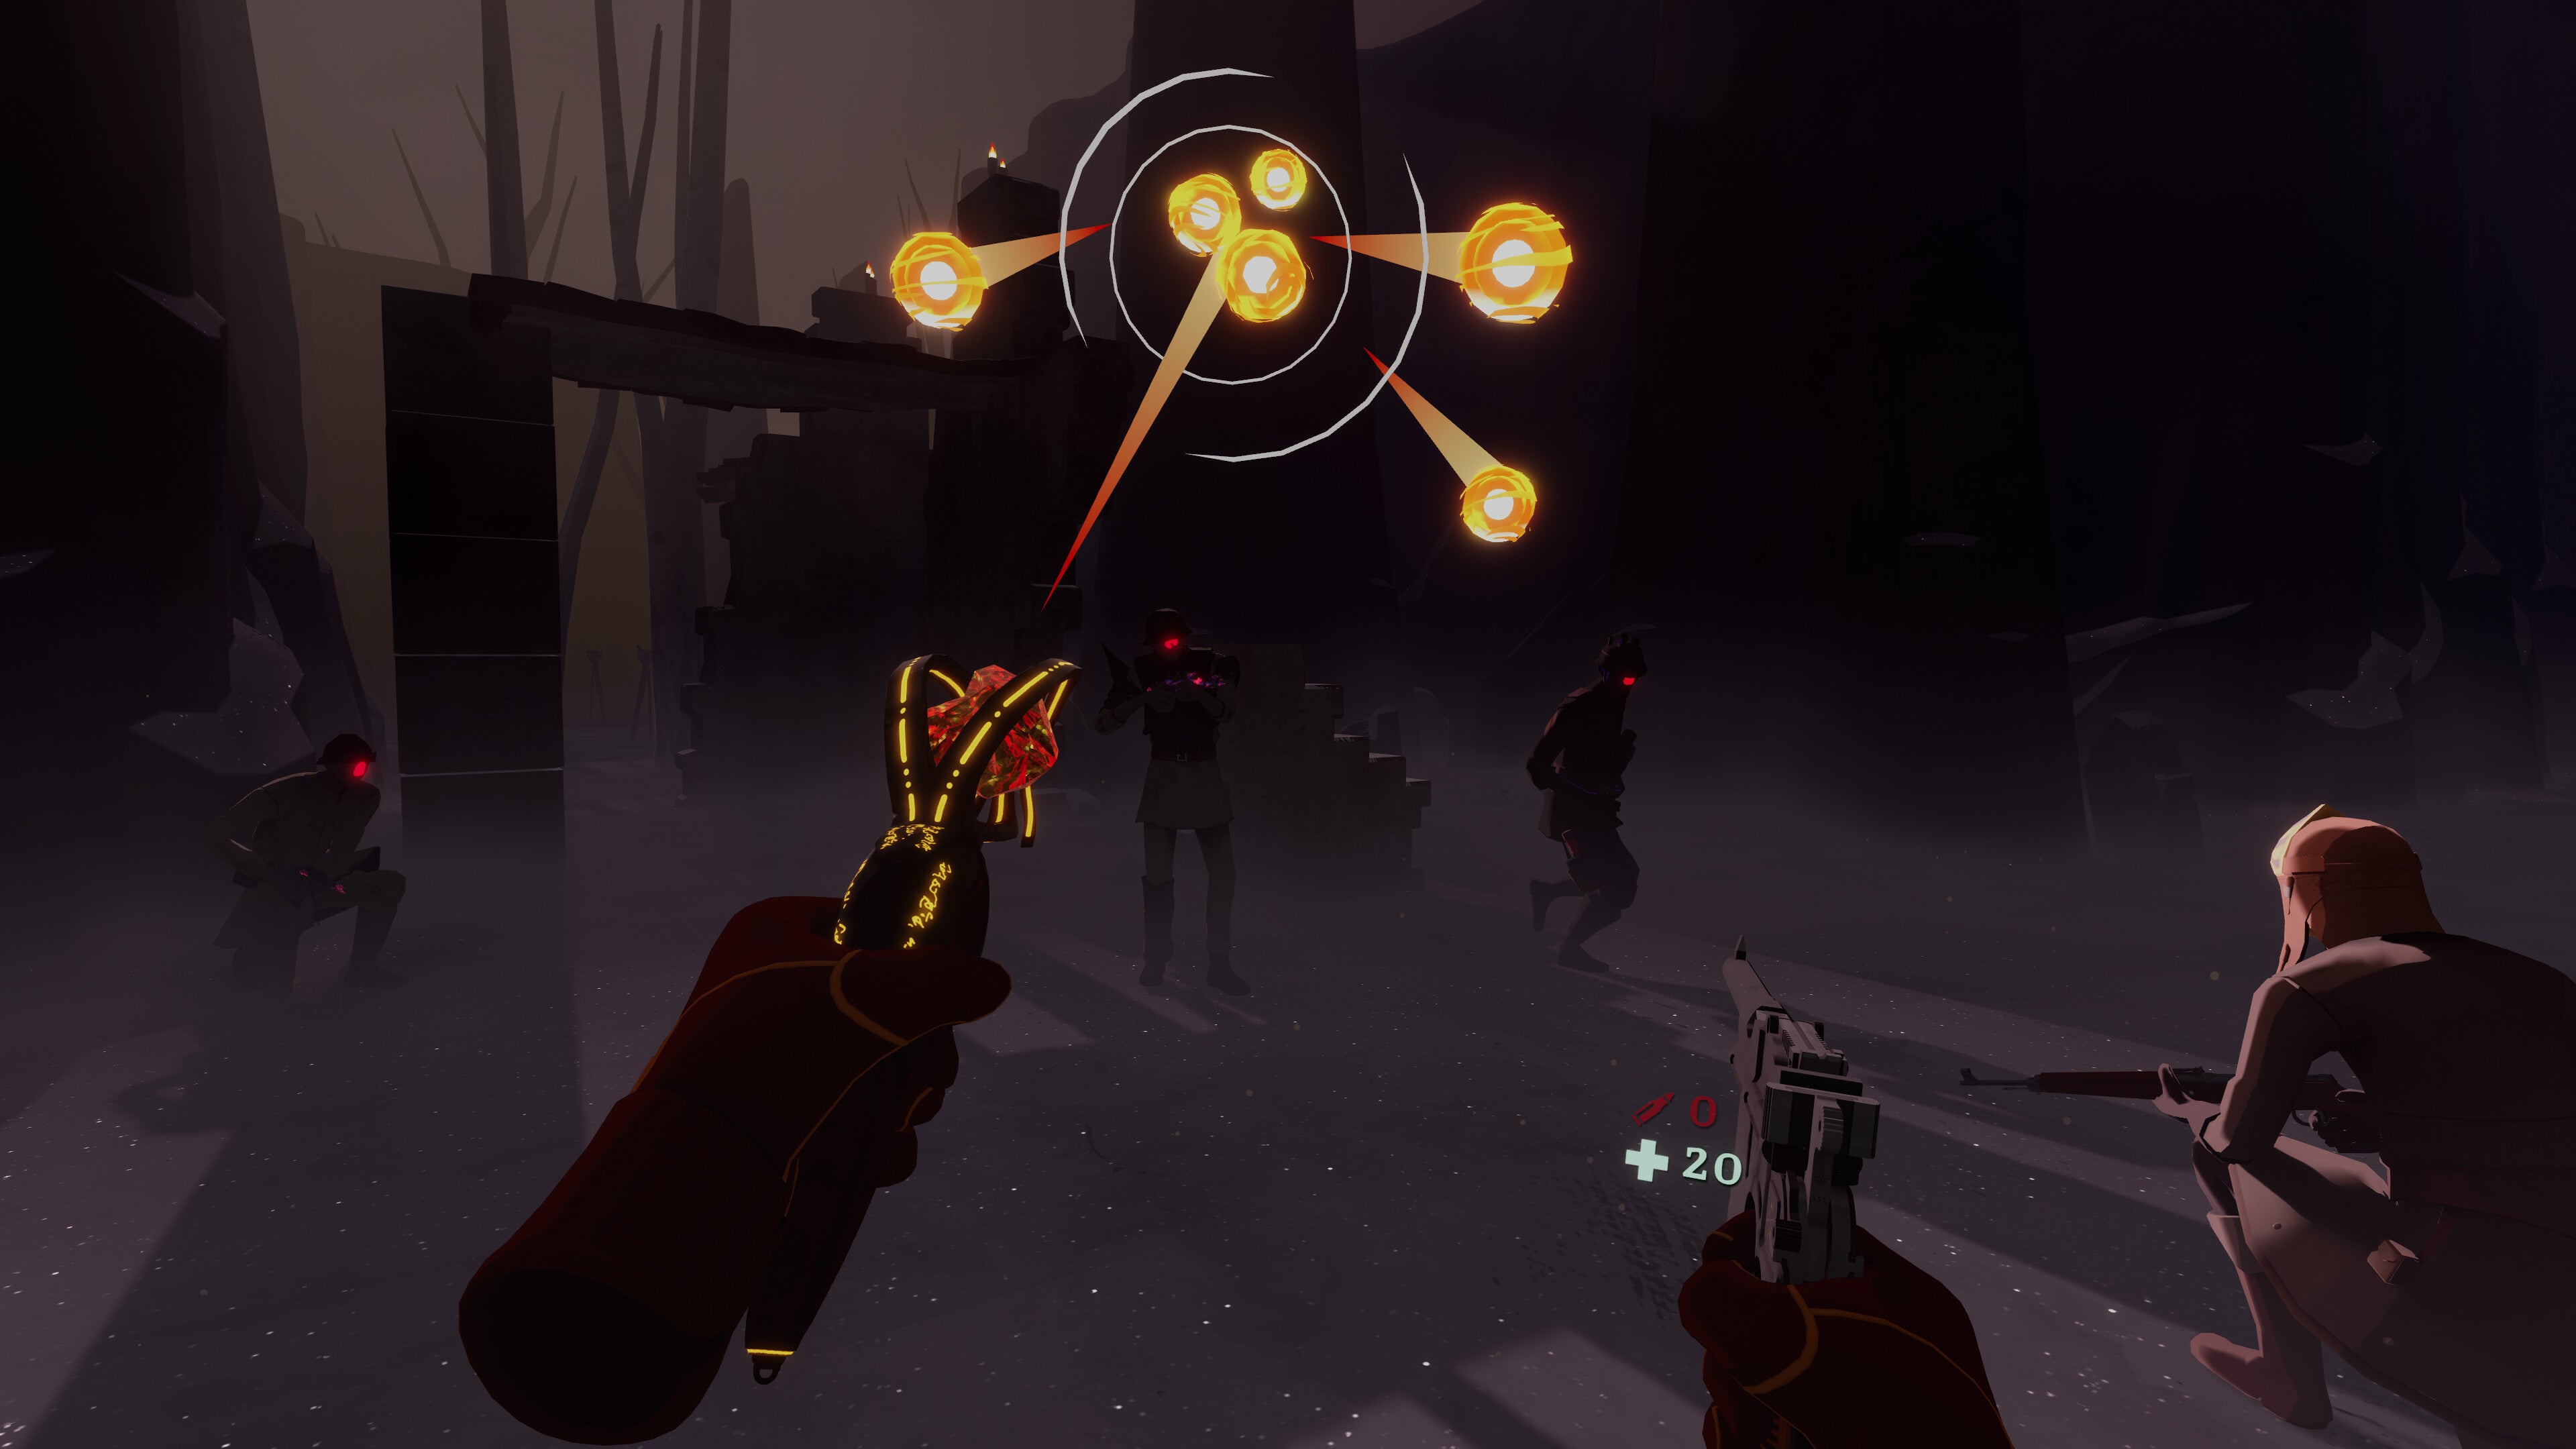 Shooting a fireball light spell at some dark, red-eyed enemies in VR roguelike The Light Brigade